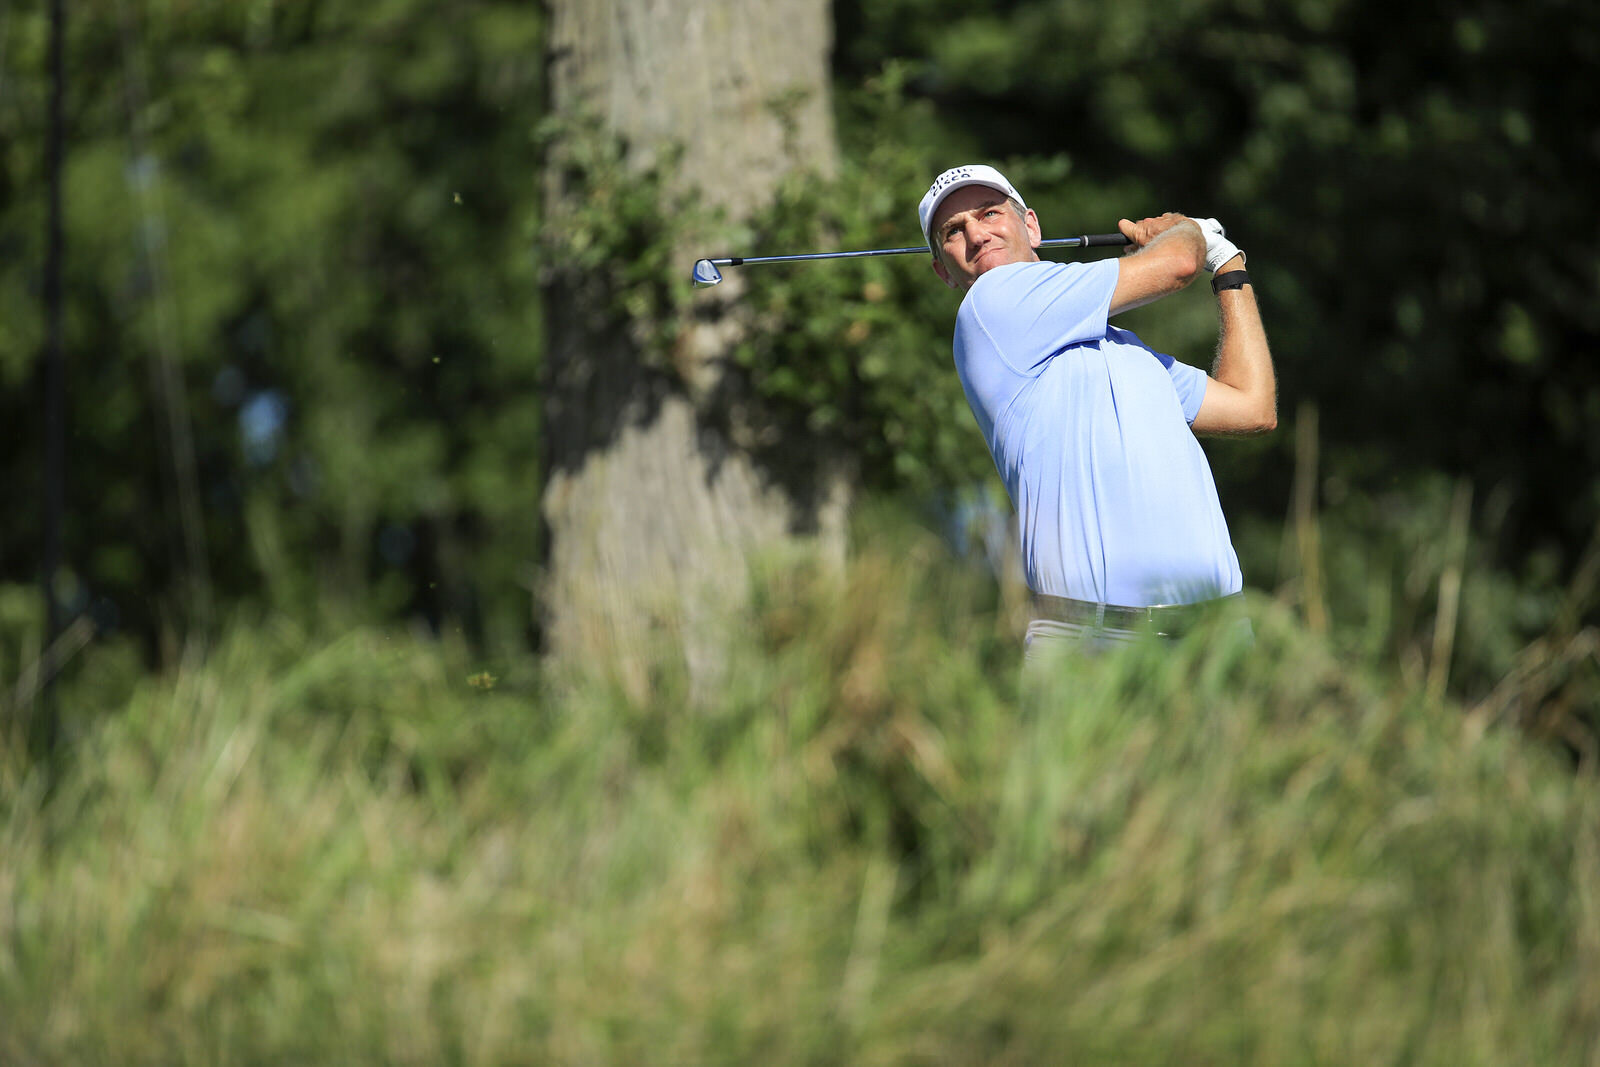  OLYMPIA FIELDS, ILLINOIS - AUGUST 28: Brendon Todd of the United States plays his shot from the sixth tee during the second round of the BMW Championship on the North Course at Olympia Fields Country Club on August 28, 2020 in Olympia Fields, Illino